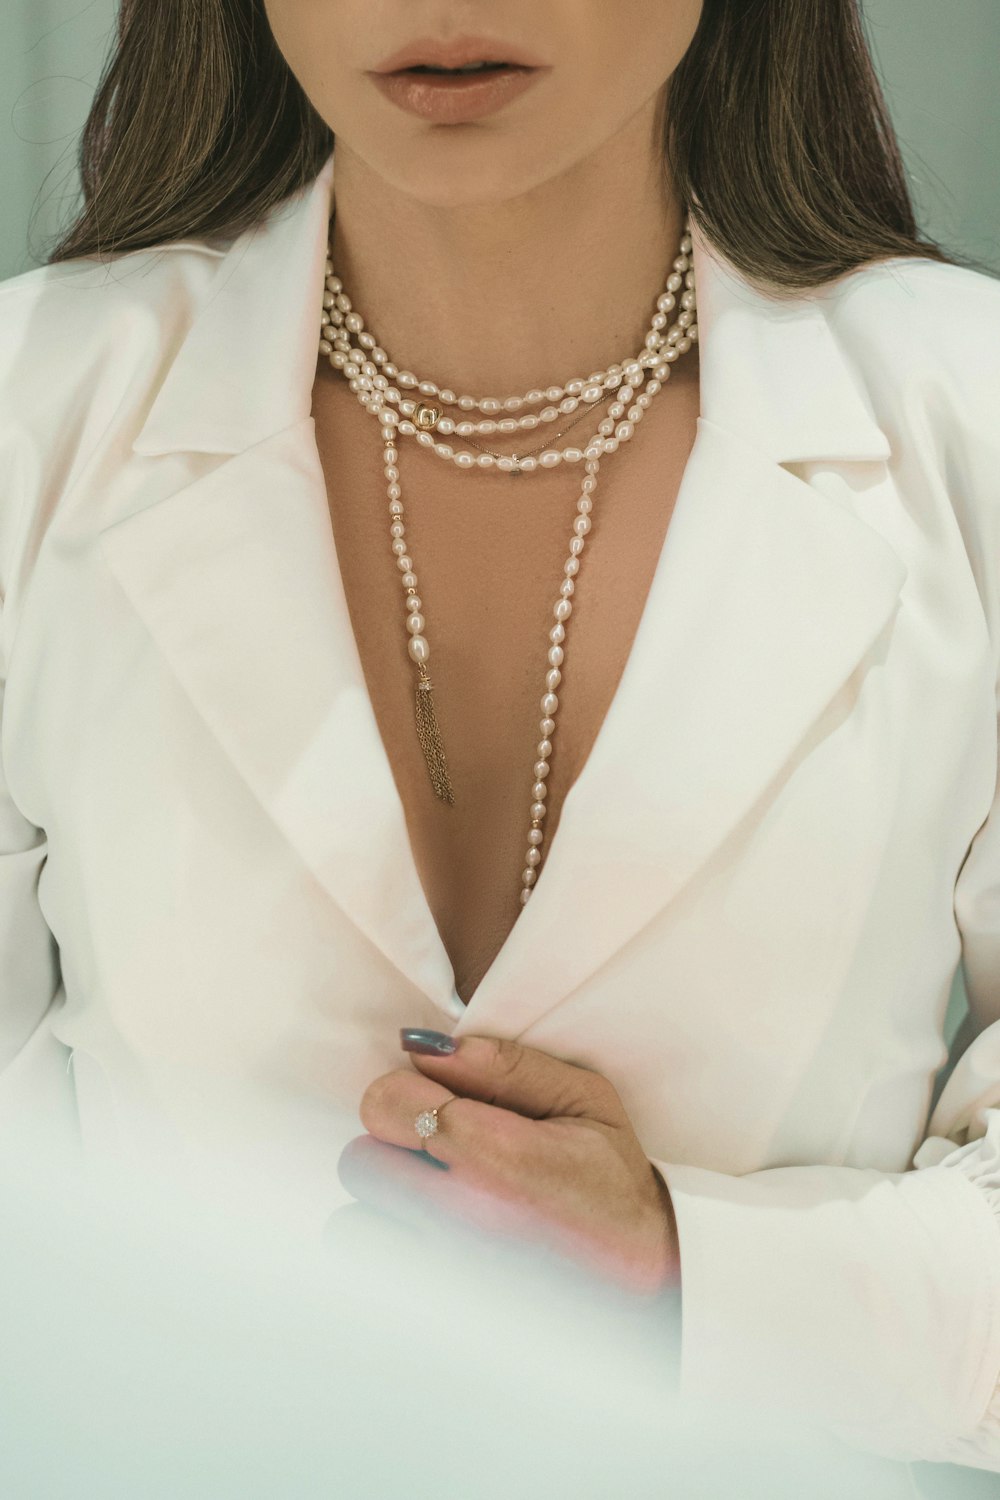 person wearing silver necklace and white robe